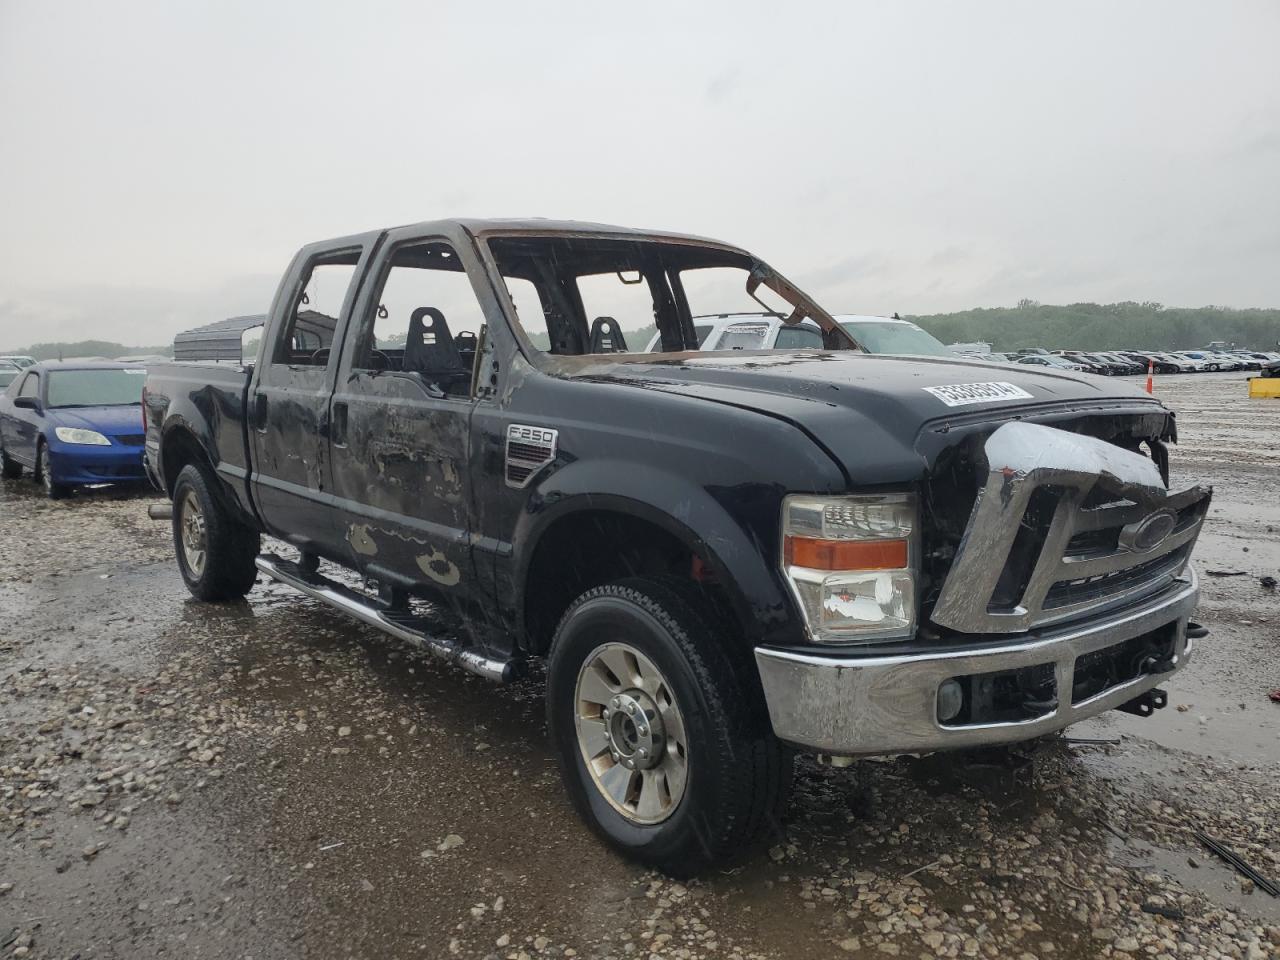 1FTSW2BRXAEA73475 2010 Ford F250 Super Duty